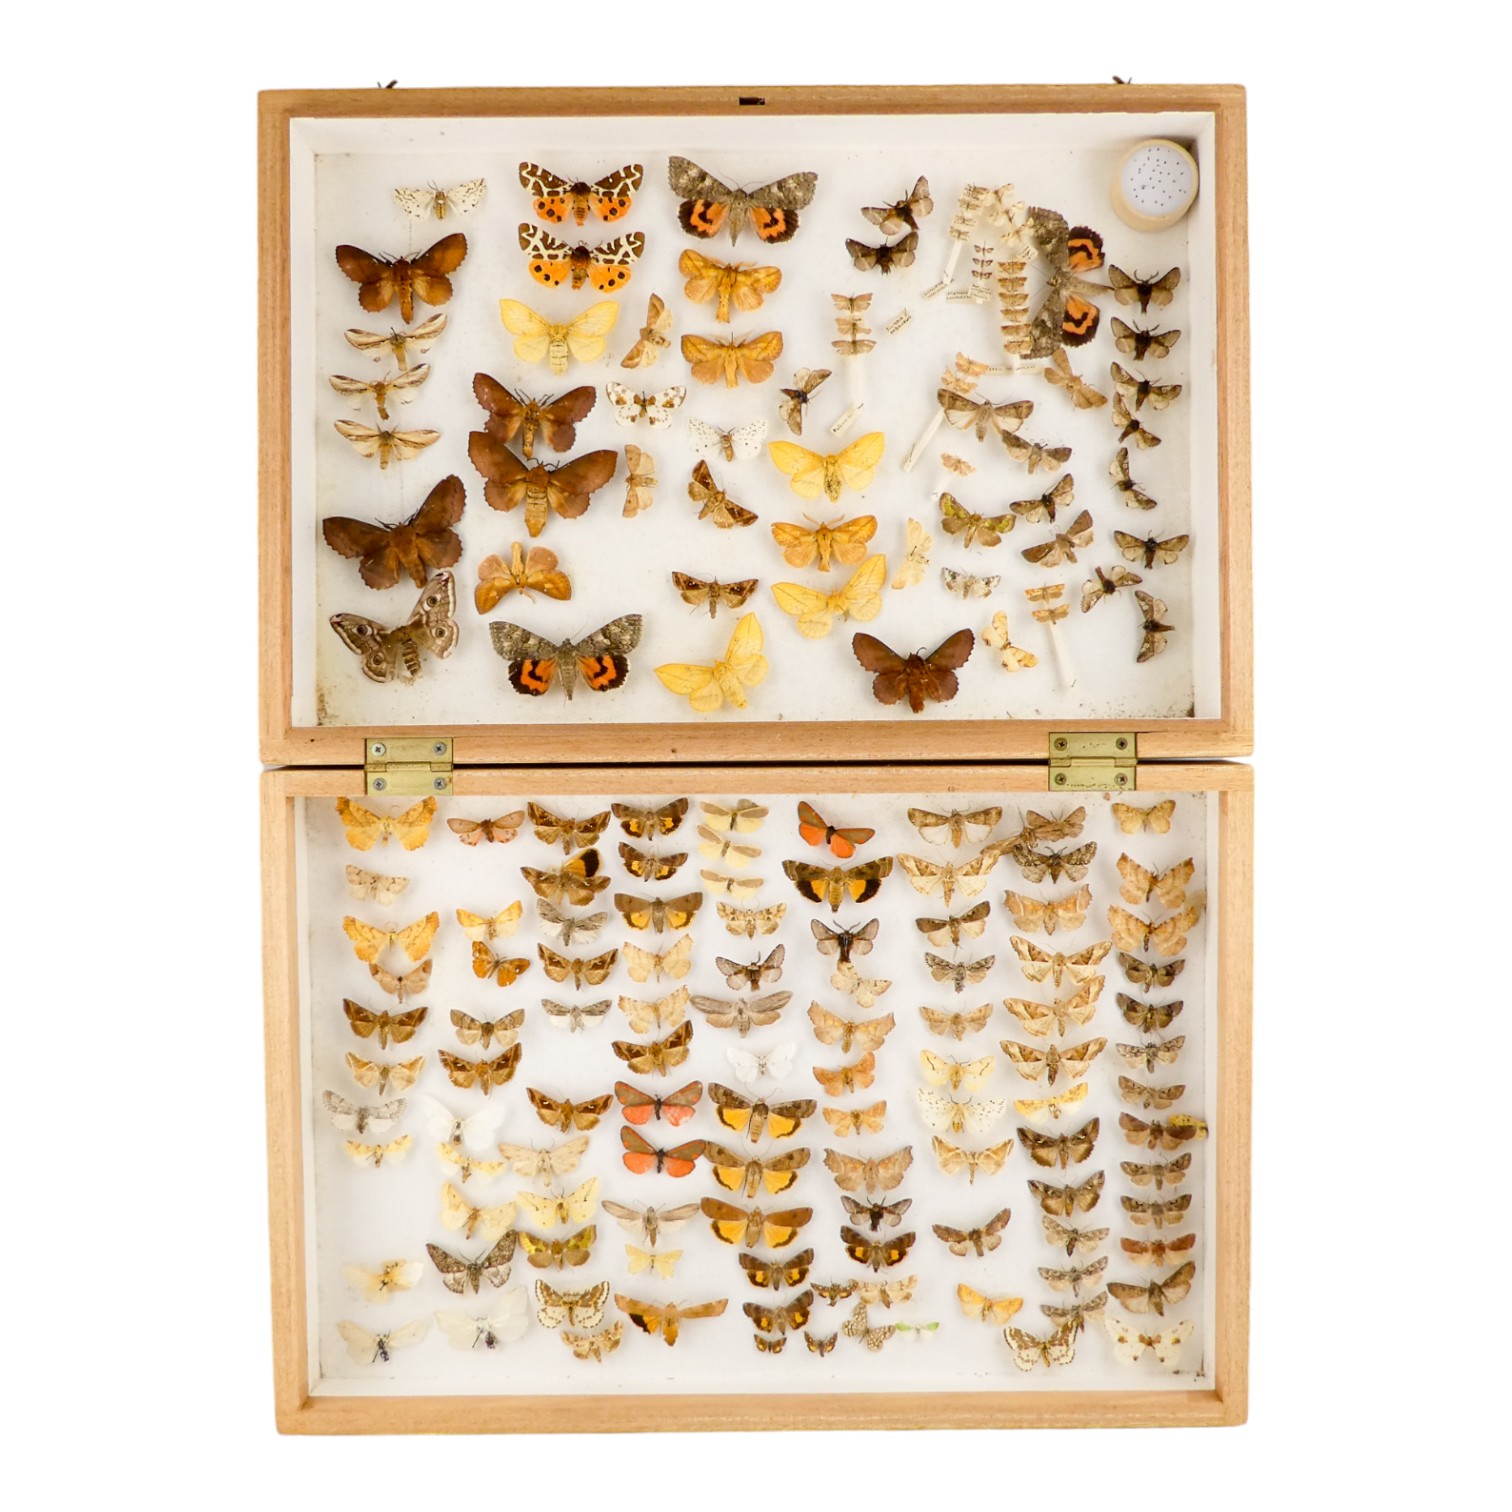 A case of butterflies and moths in rows - including Marbled Underwing